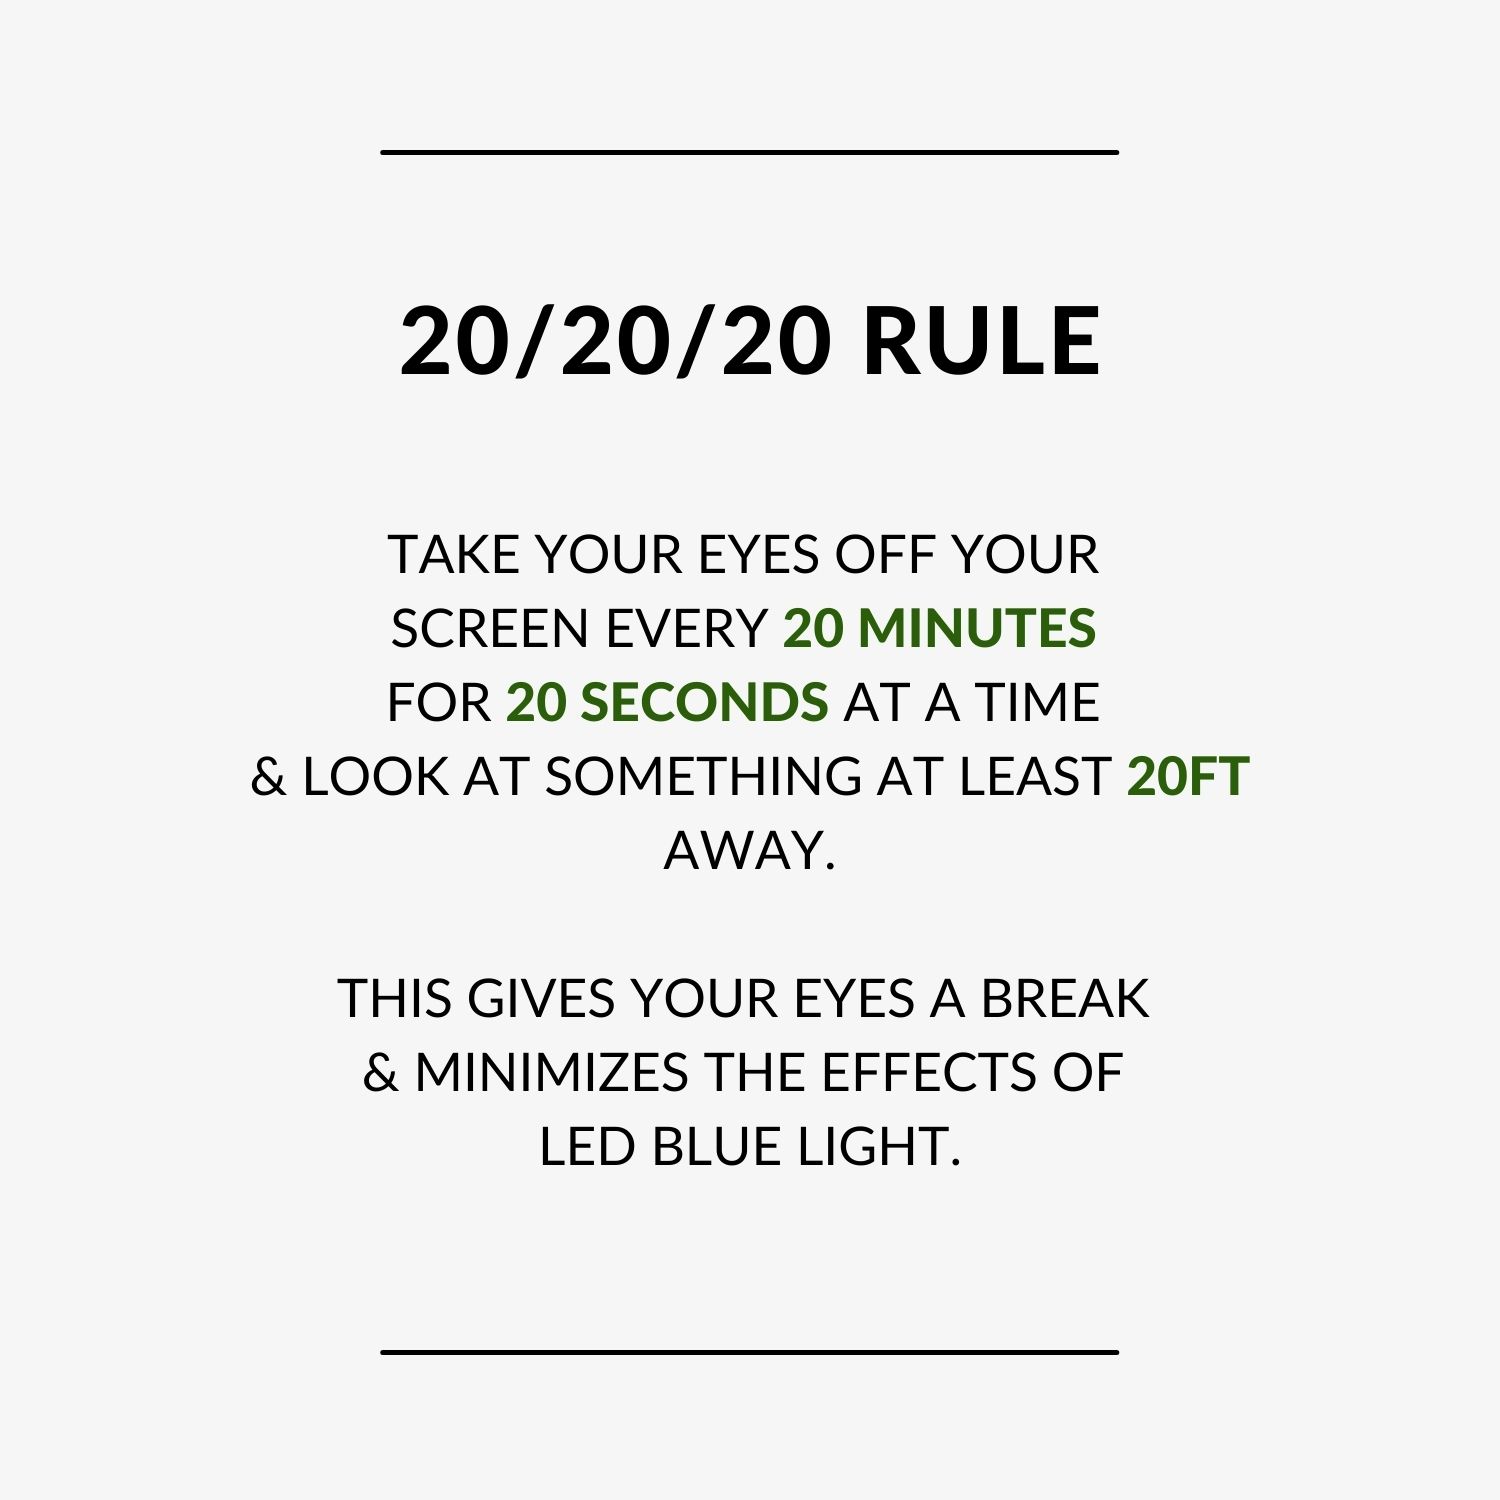 The 20/20/20 Rule